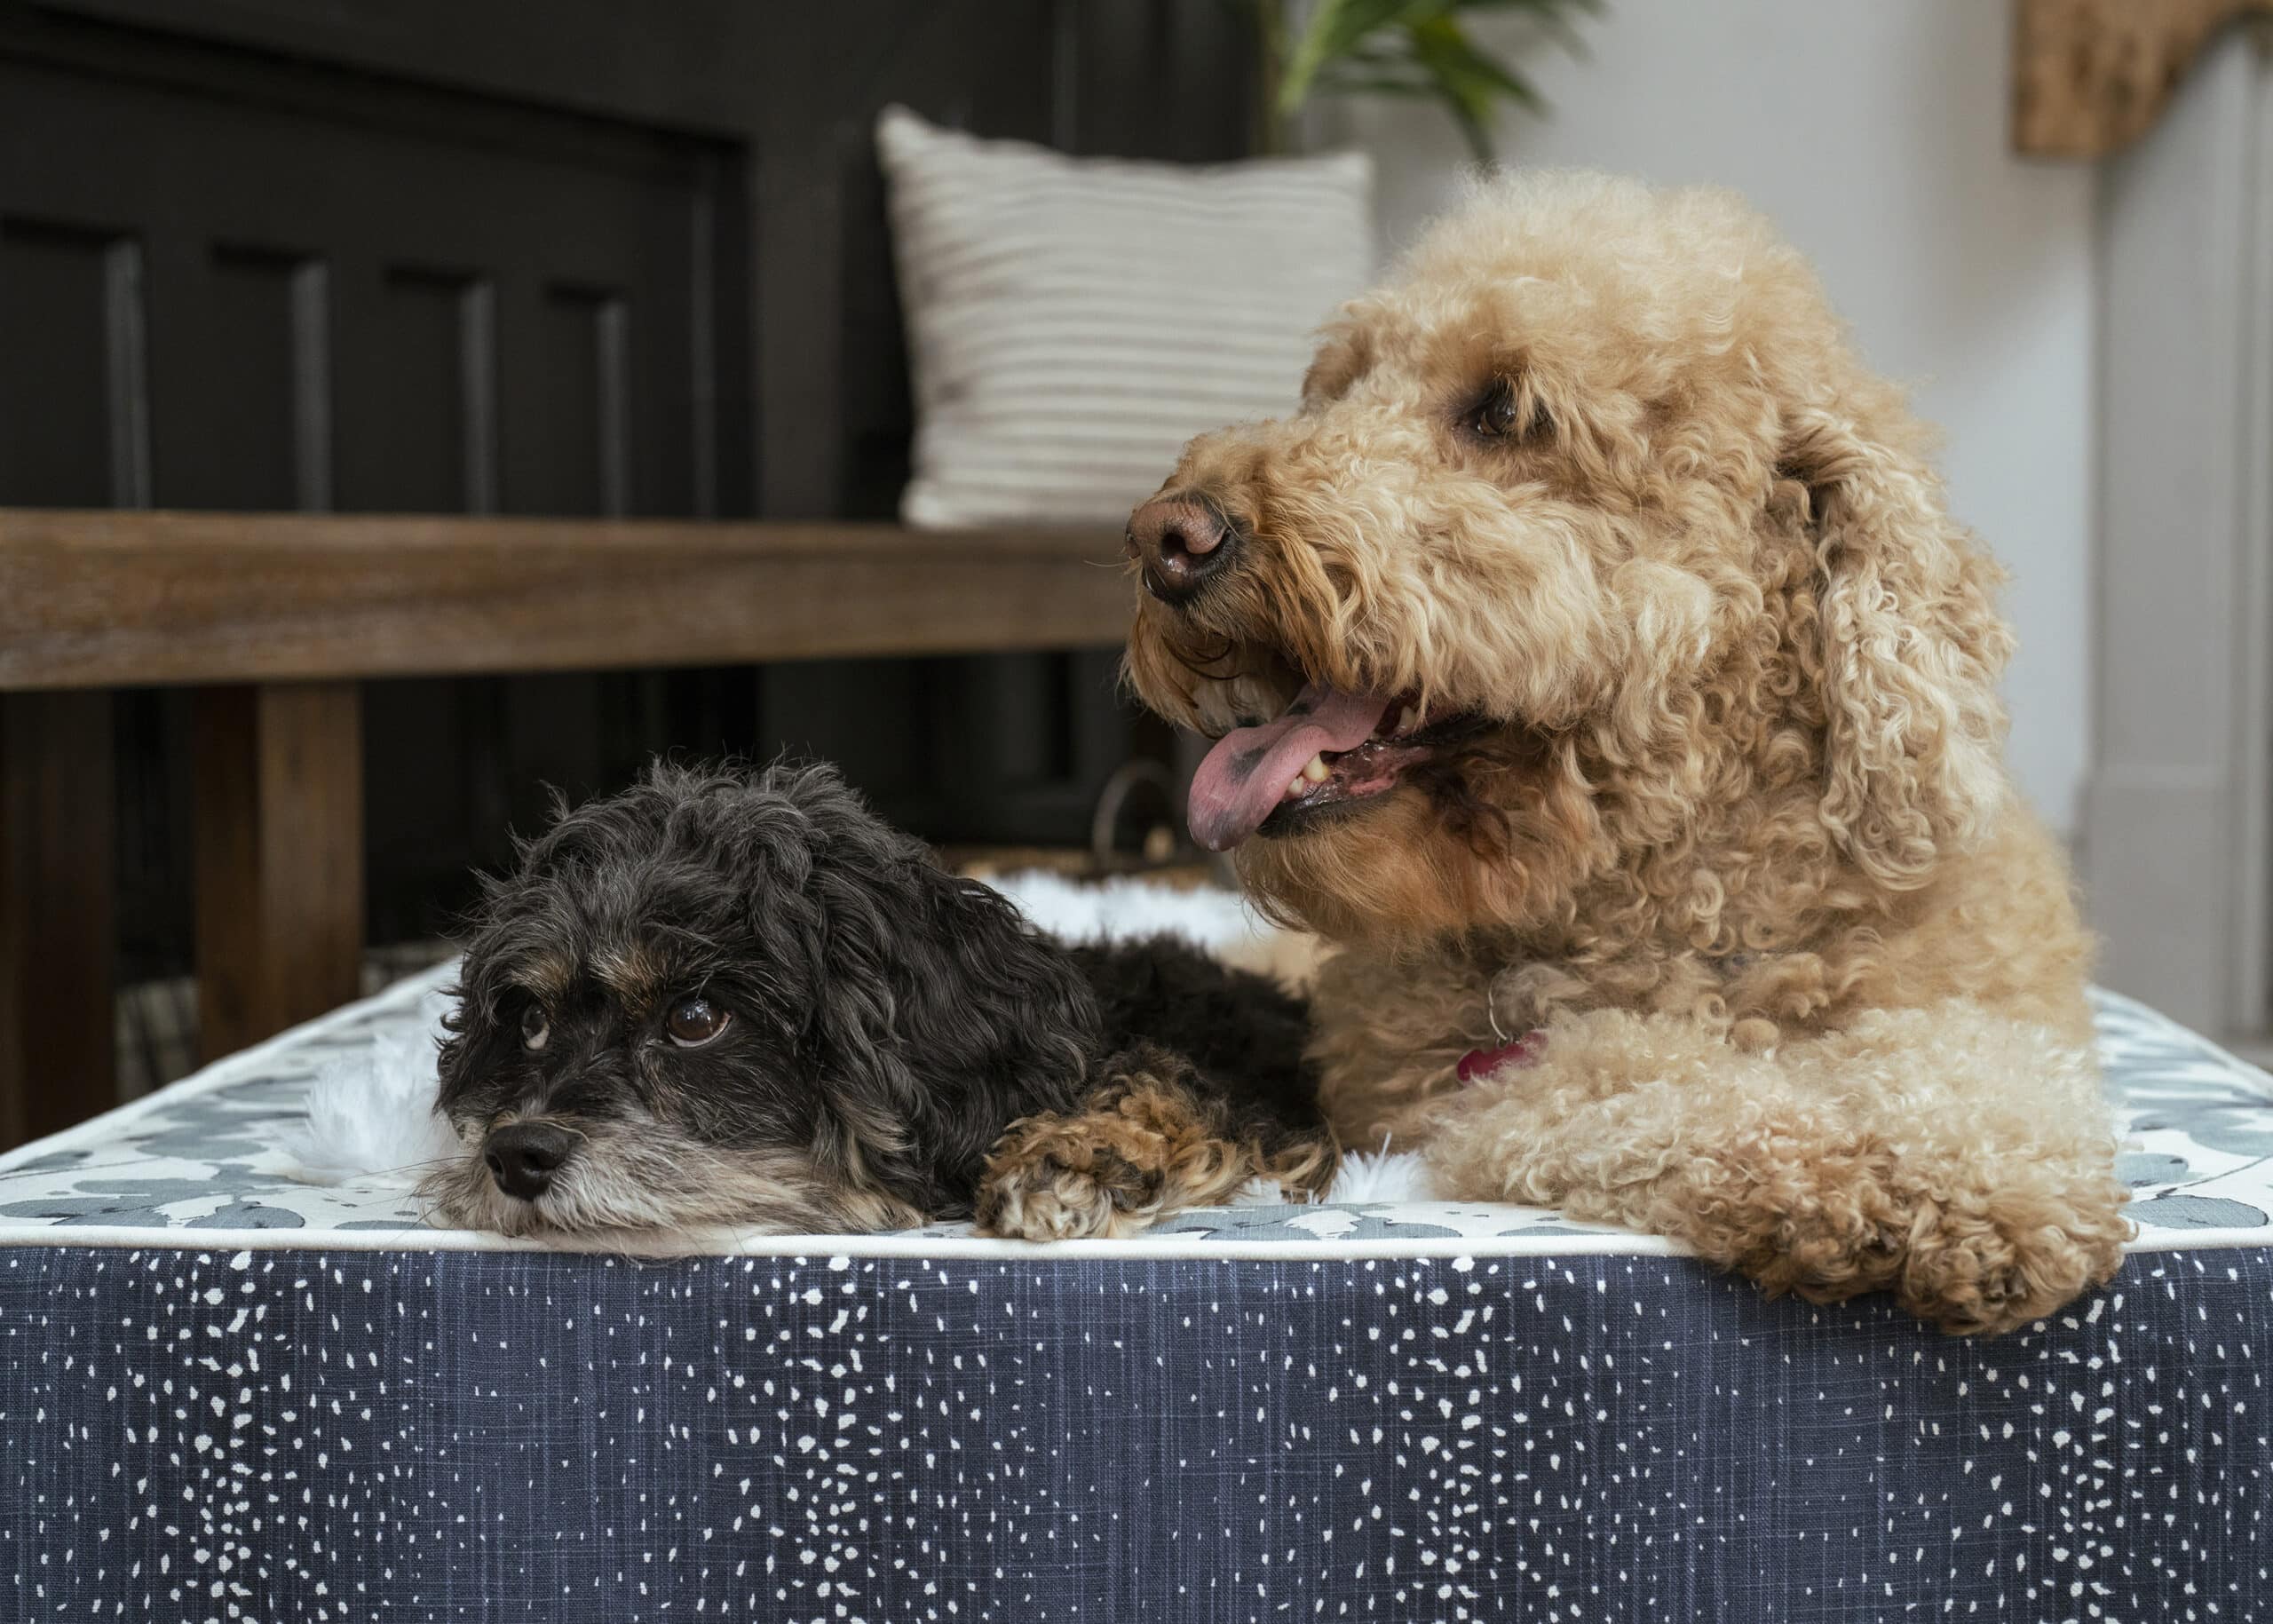 custom throne dog bed for sharing, luxurious blanket